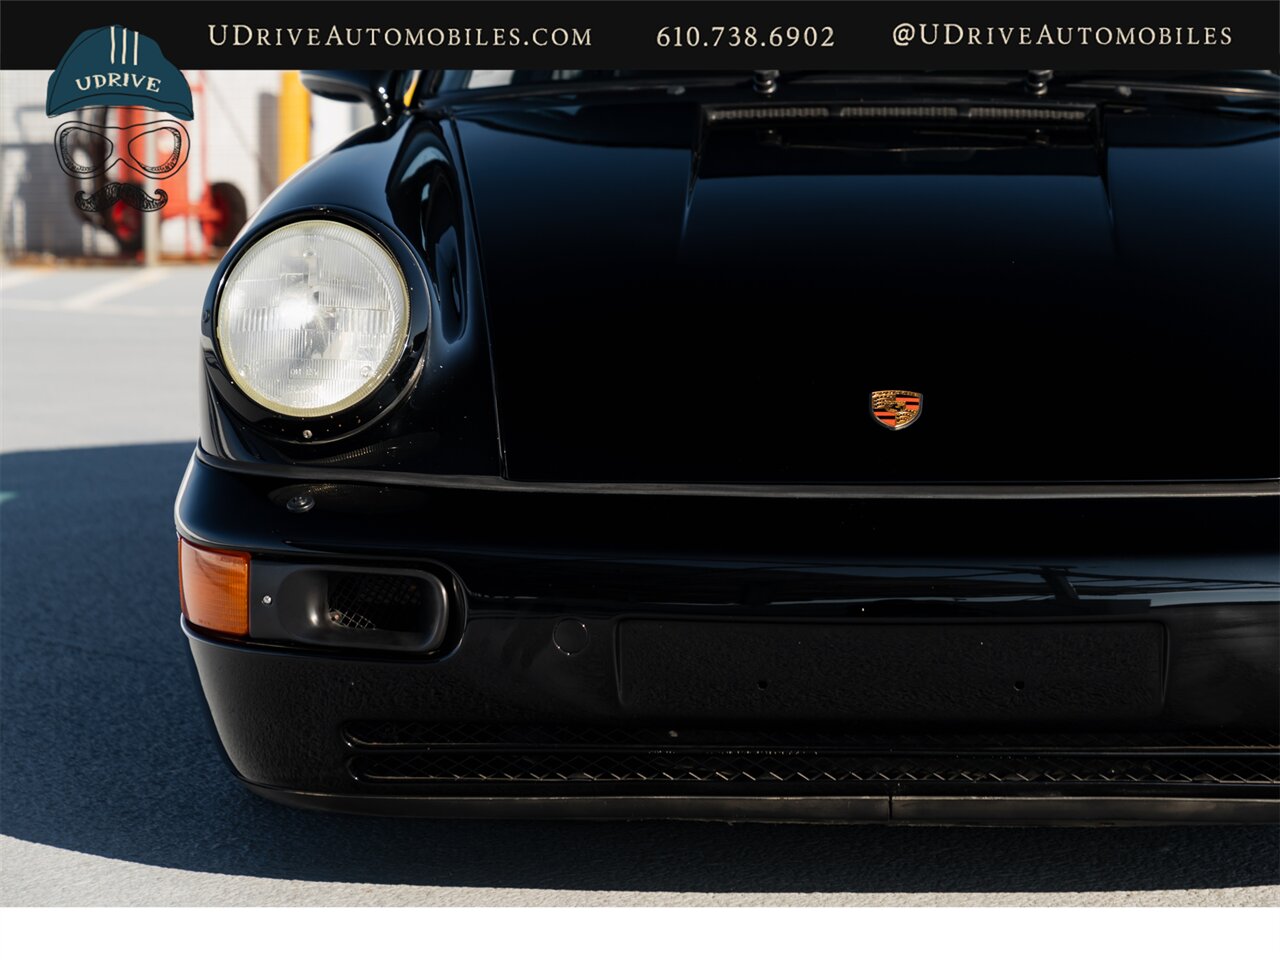 1989 Porsche 911 C4  964 Carrera 4 C4 5 Speed Manual $33k in Recent Service History - Photo 15 - West Chester, PA 19382